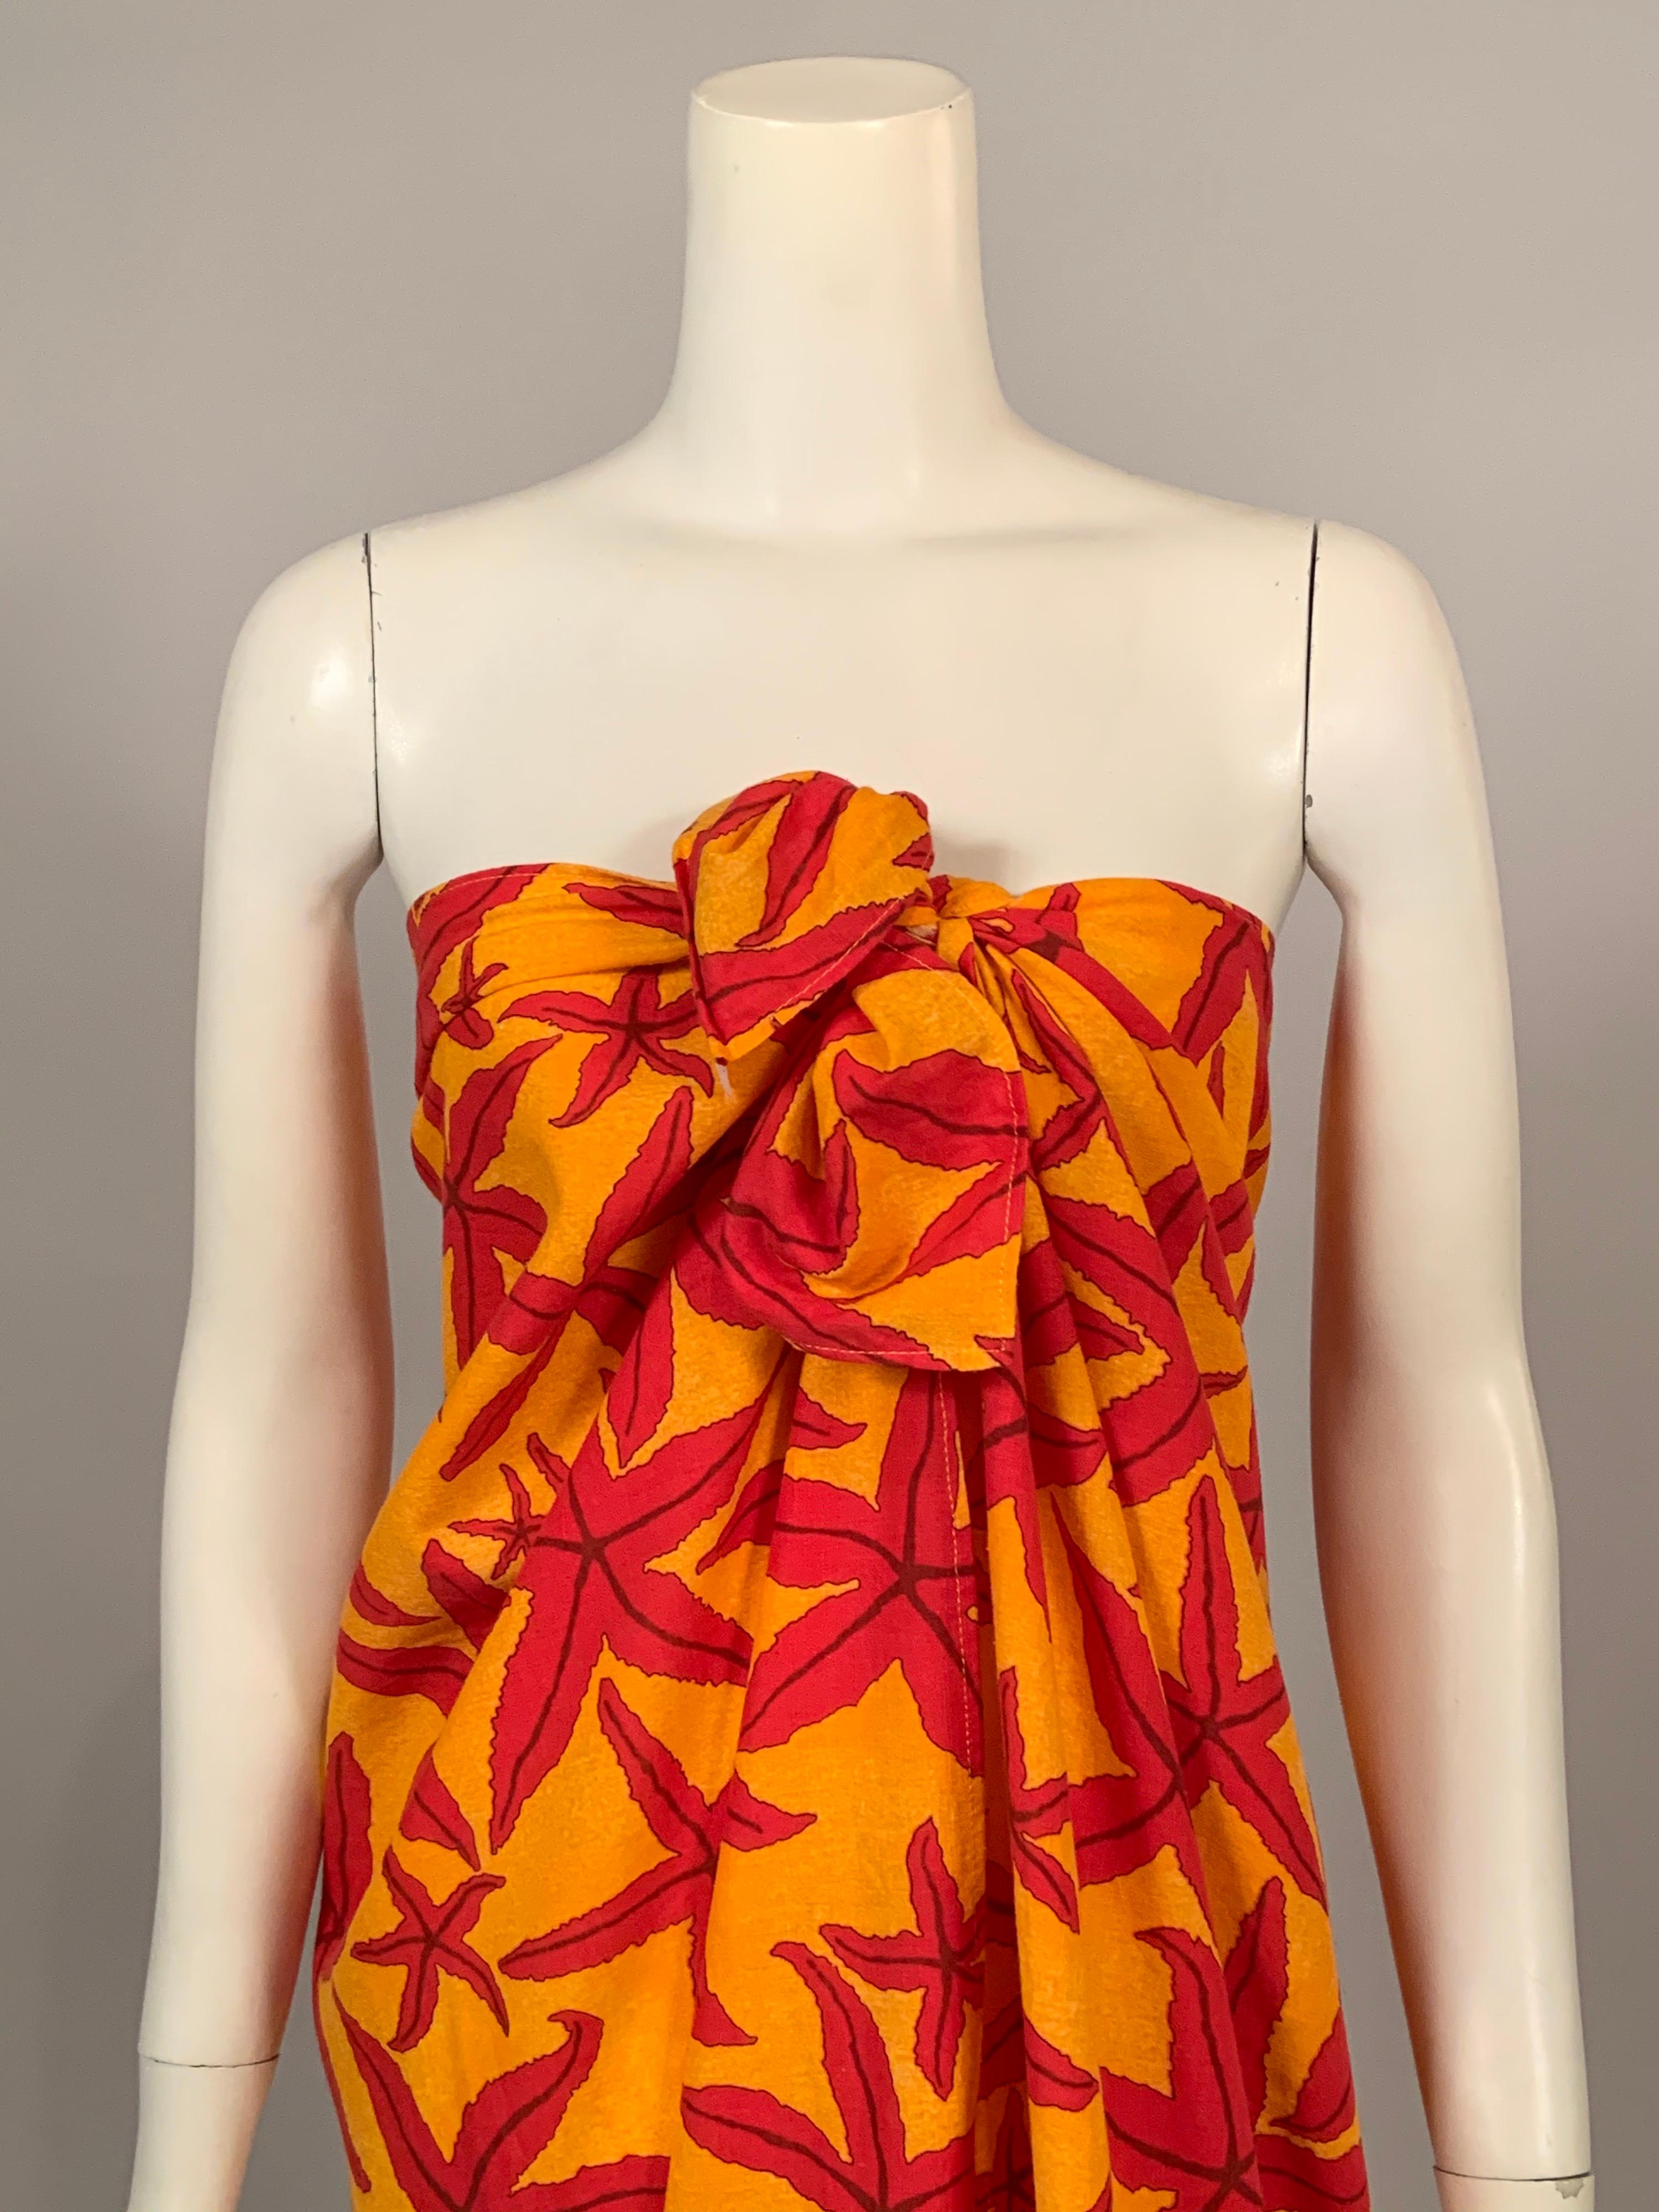 Bright and cheerful starfish of many sizes in red are swimming across a sunny yellow background in this pareo or shawl from Hermes, Paris. It is a blend of cotton, linen and silk. The Hermes label is sewn to one corner of the shawl and it is in